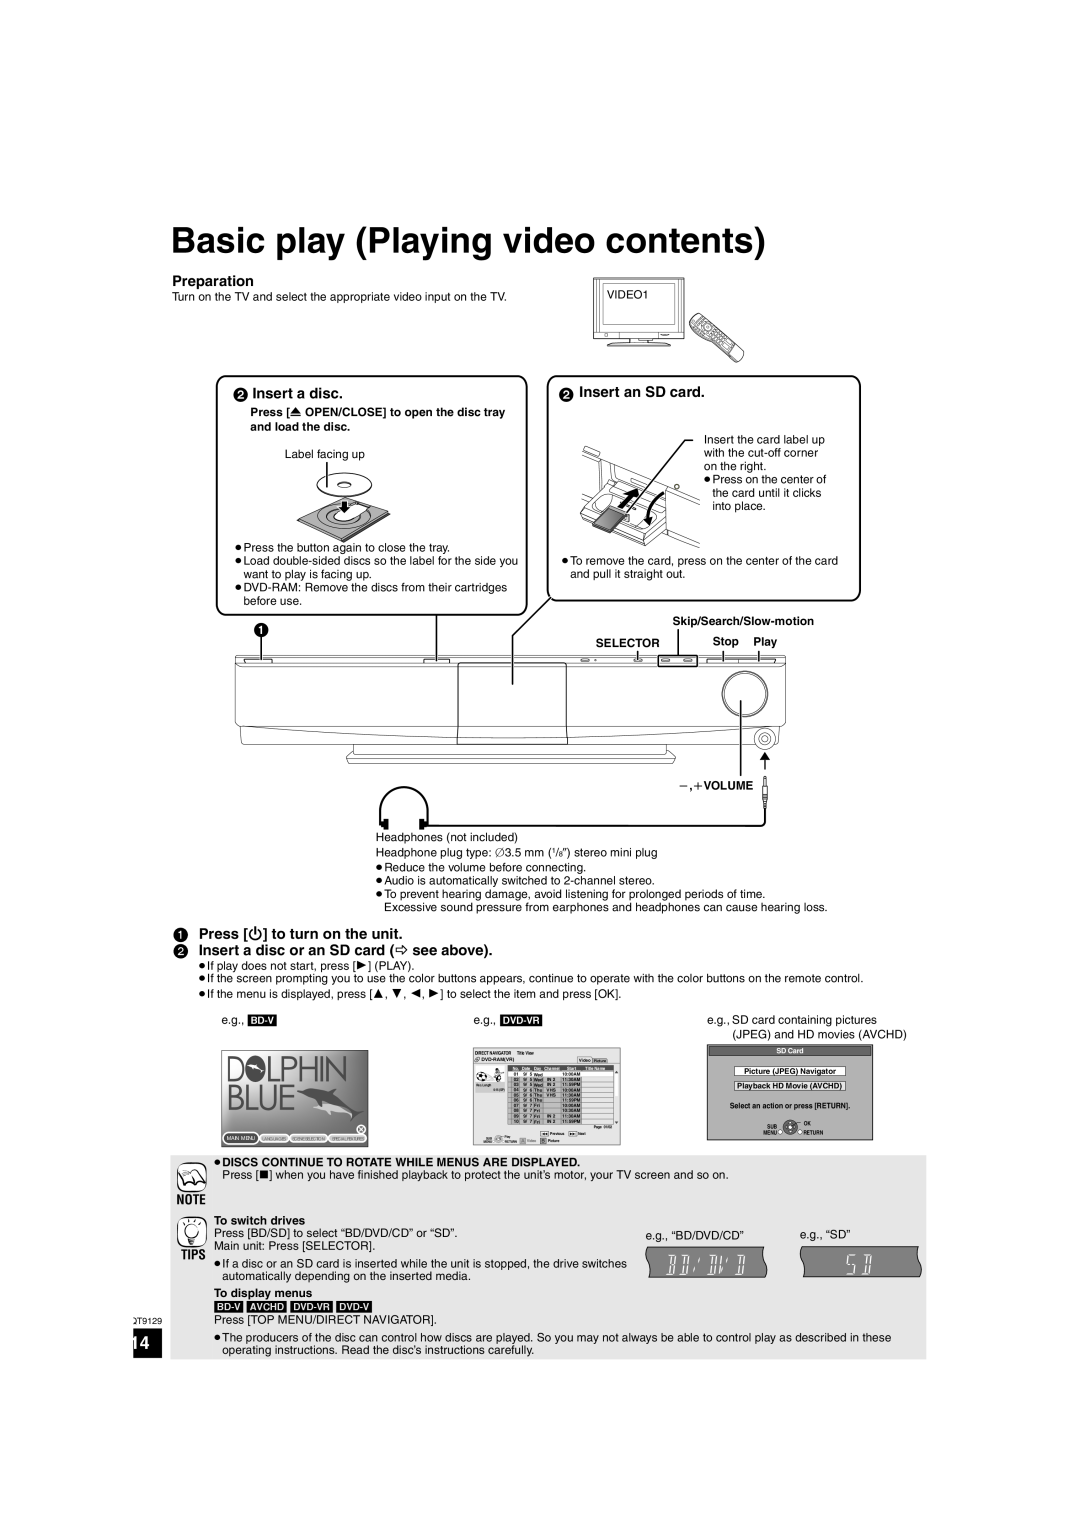 Panasonic SC-BT100 Basic play Playing video contents, Insert a disc, Insert an SD card, 1Press Í to turn on the unit 